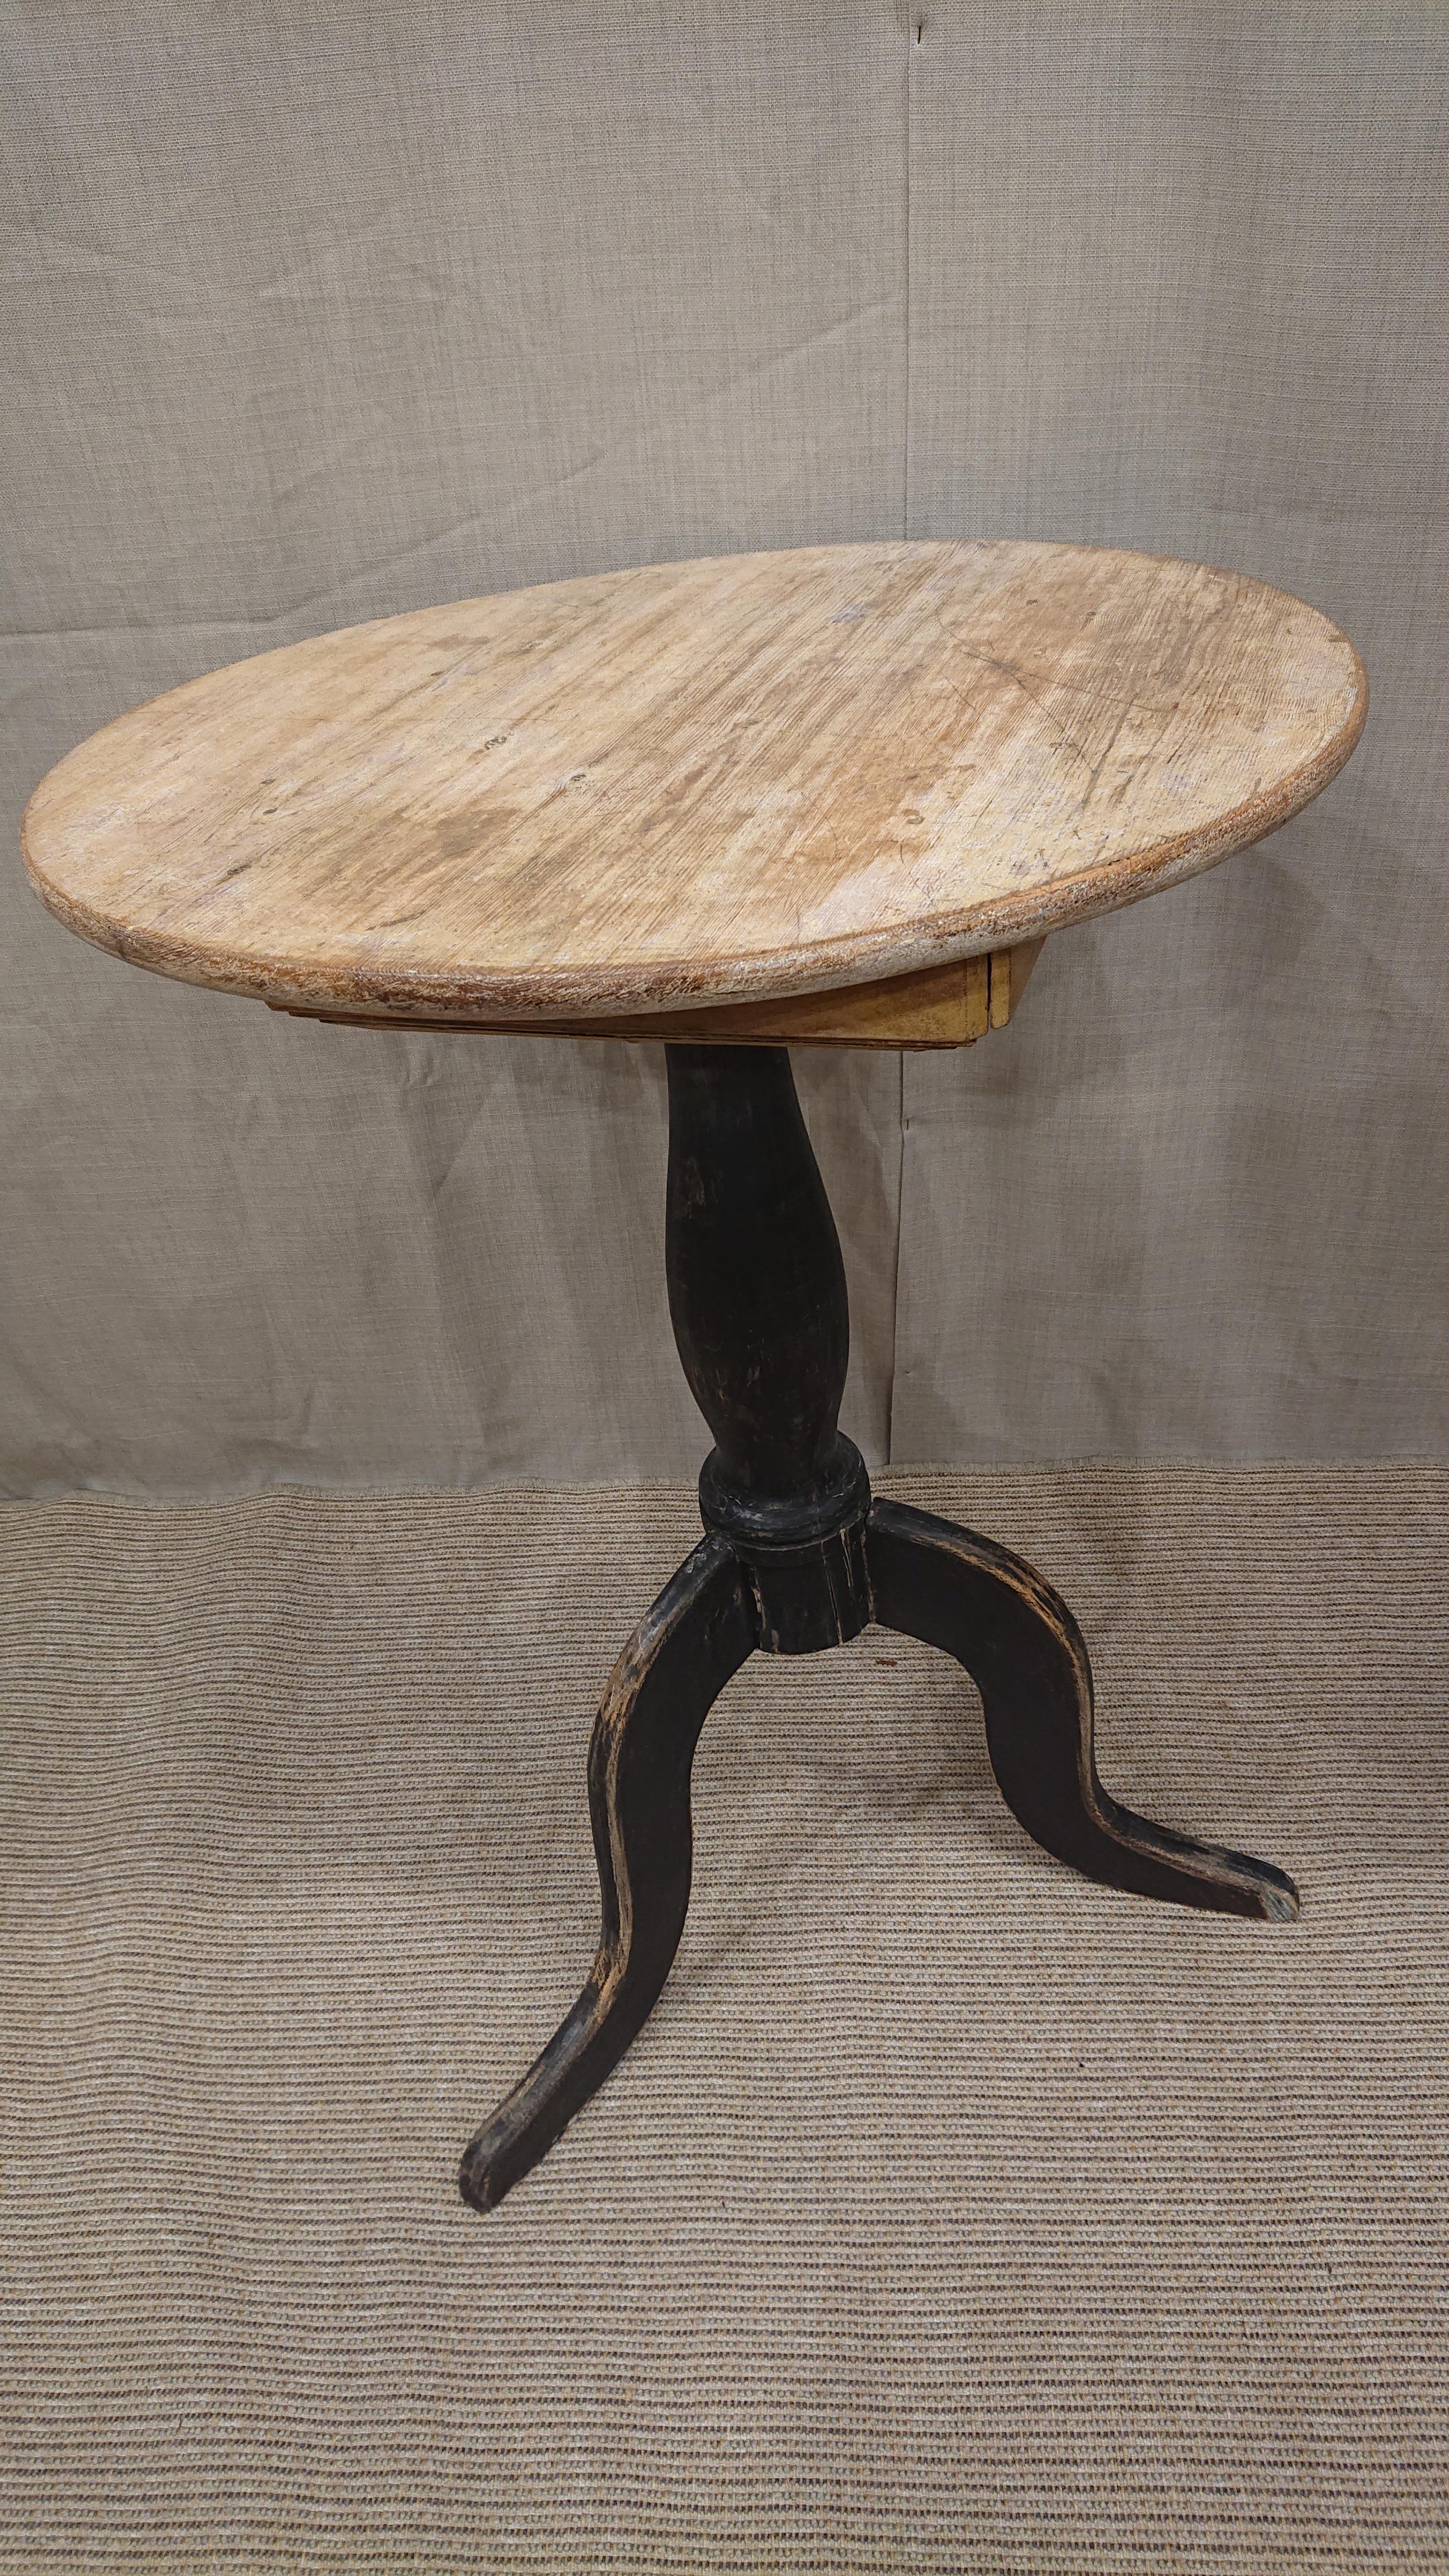 19th Century Swedish Empire Pedestal Table with Drawer & Original Paint For Sale 15